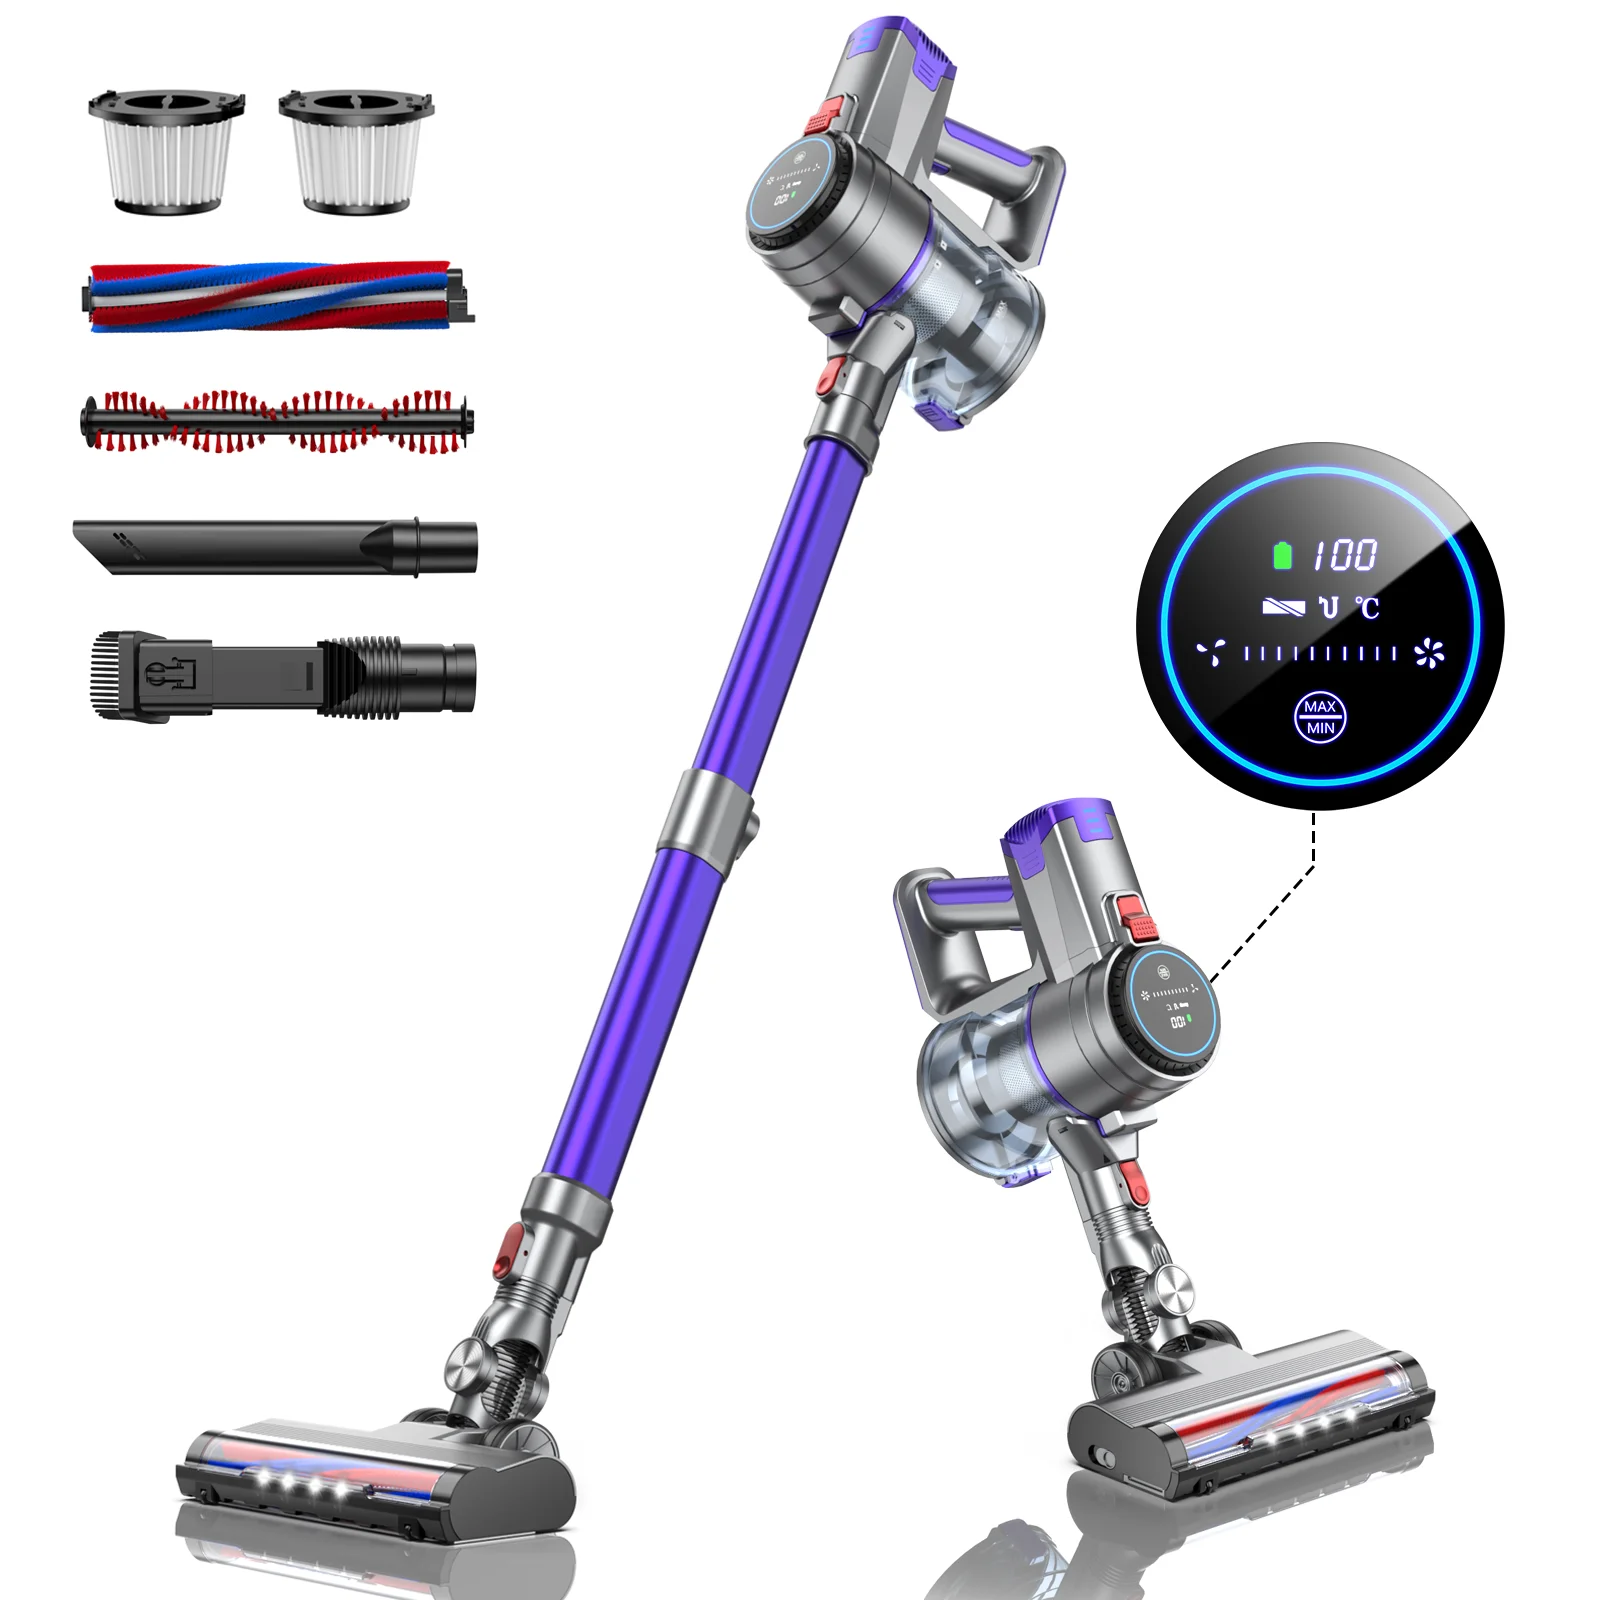 

400W 33000Pa Powerful Wireless Handheld Cordless Vacuum Cleaner For Home Appliance with Touch Screen 55 Min Runtime aspiradora